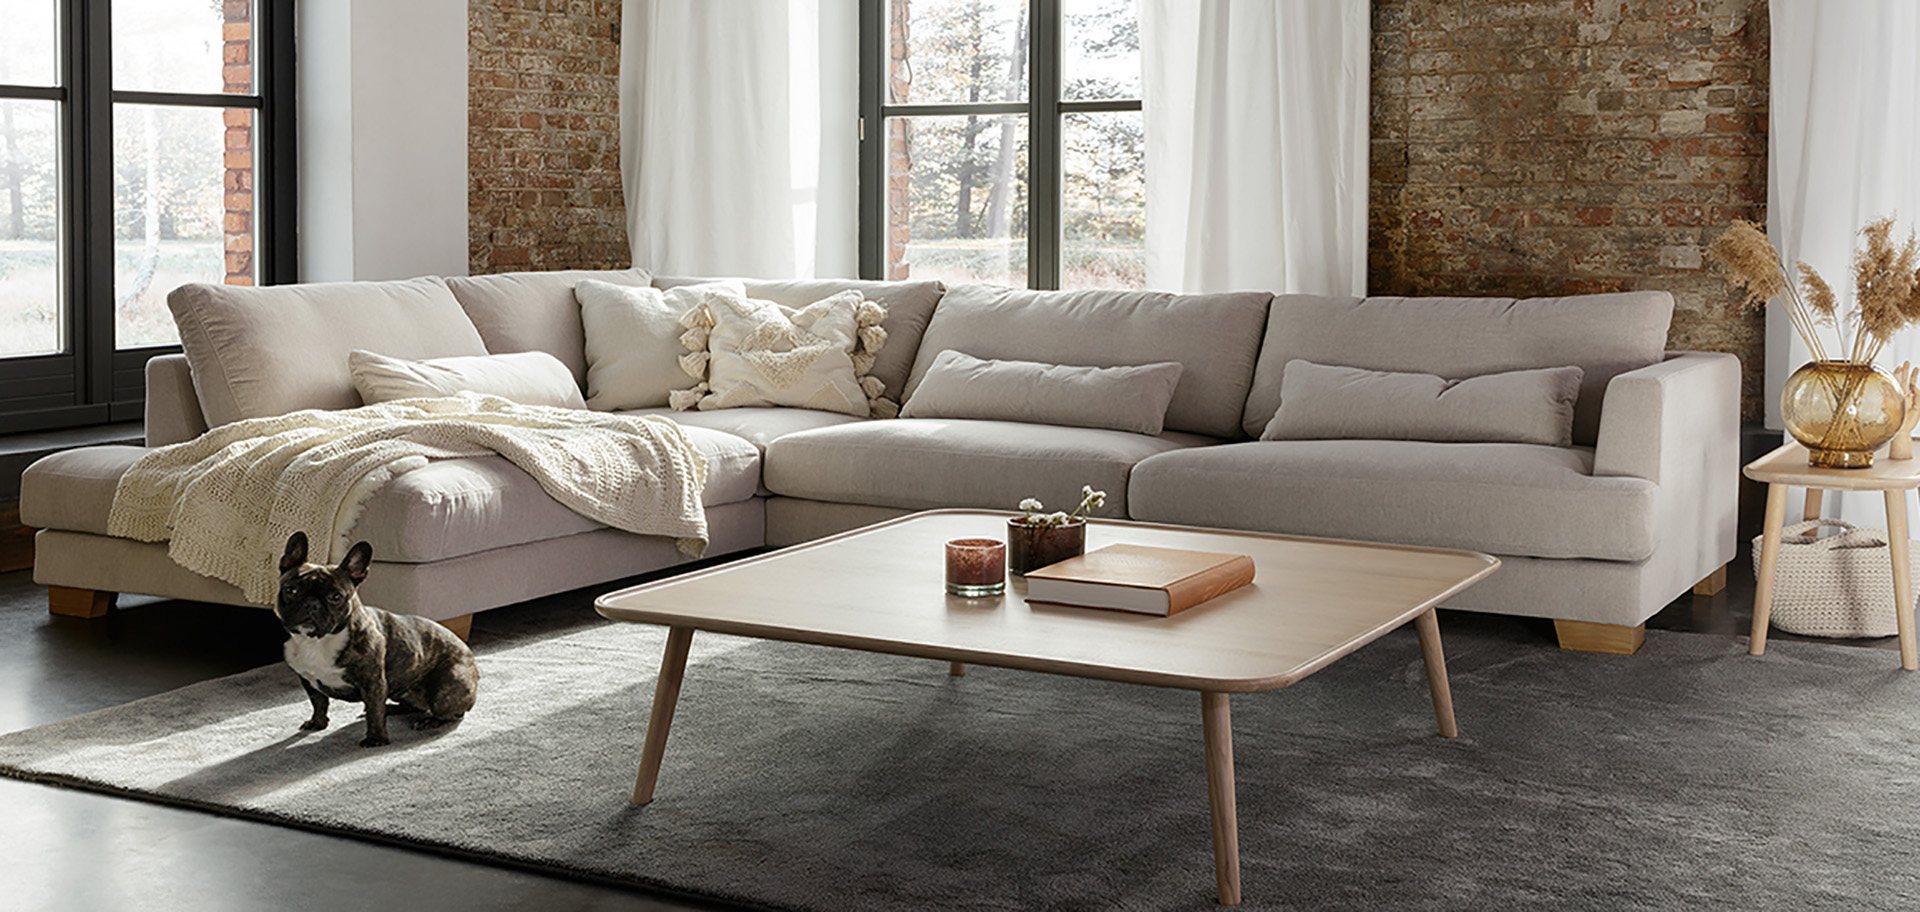 Superbly Stylish Sofas, Armchairs and Sofa Beds